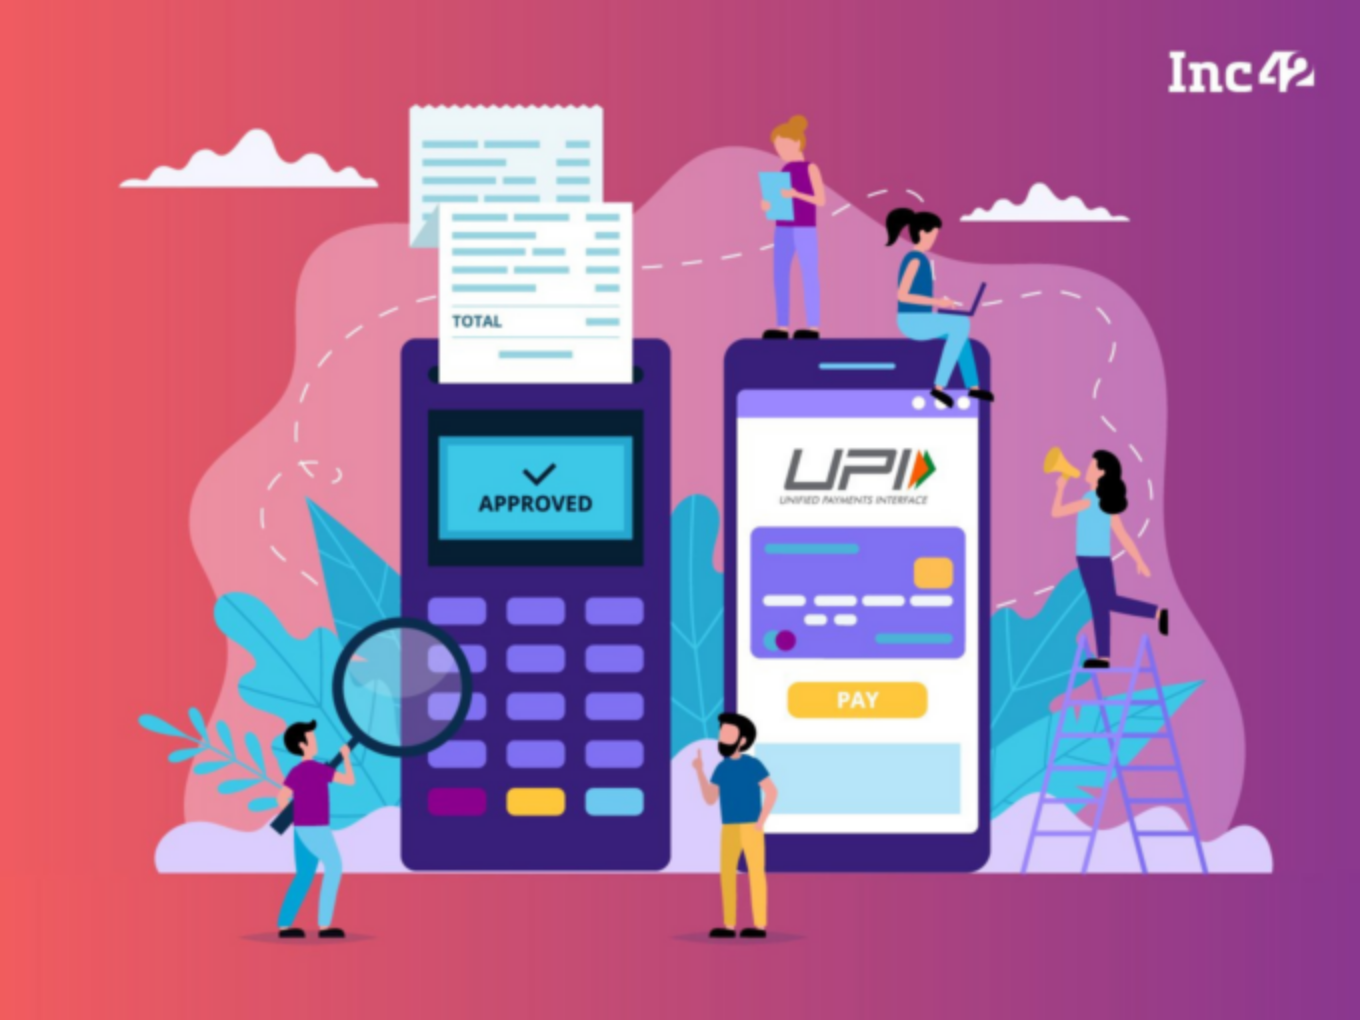 India Likely To Promote UPI, RuPay To De-Risk Itself: Report